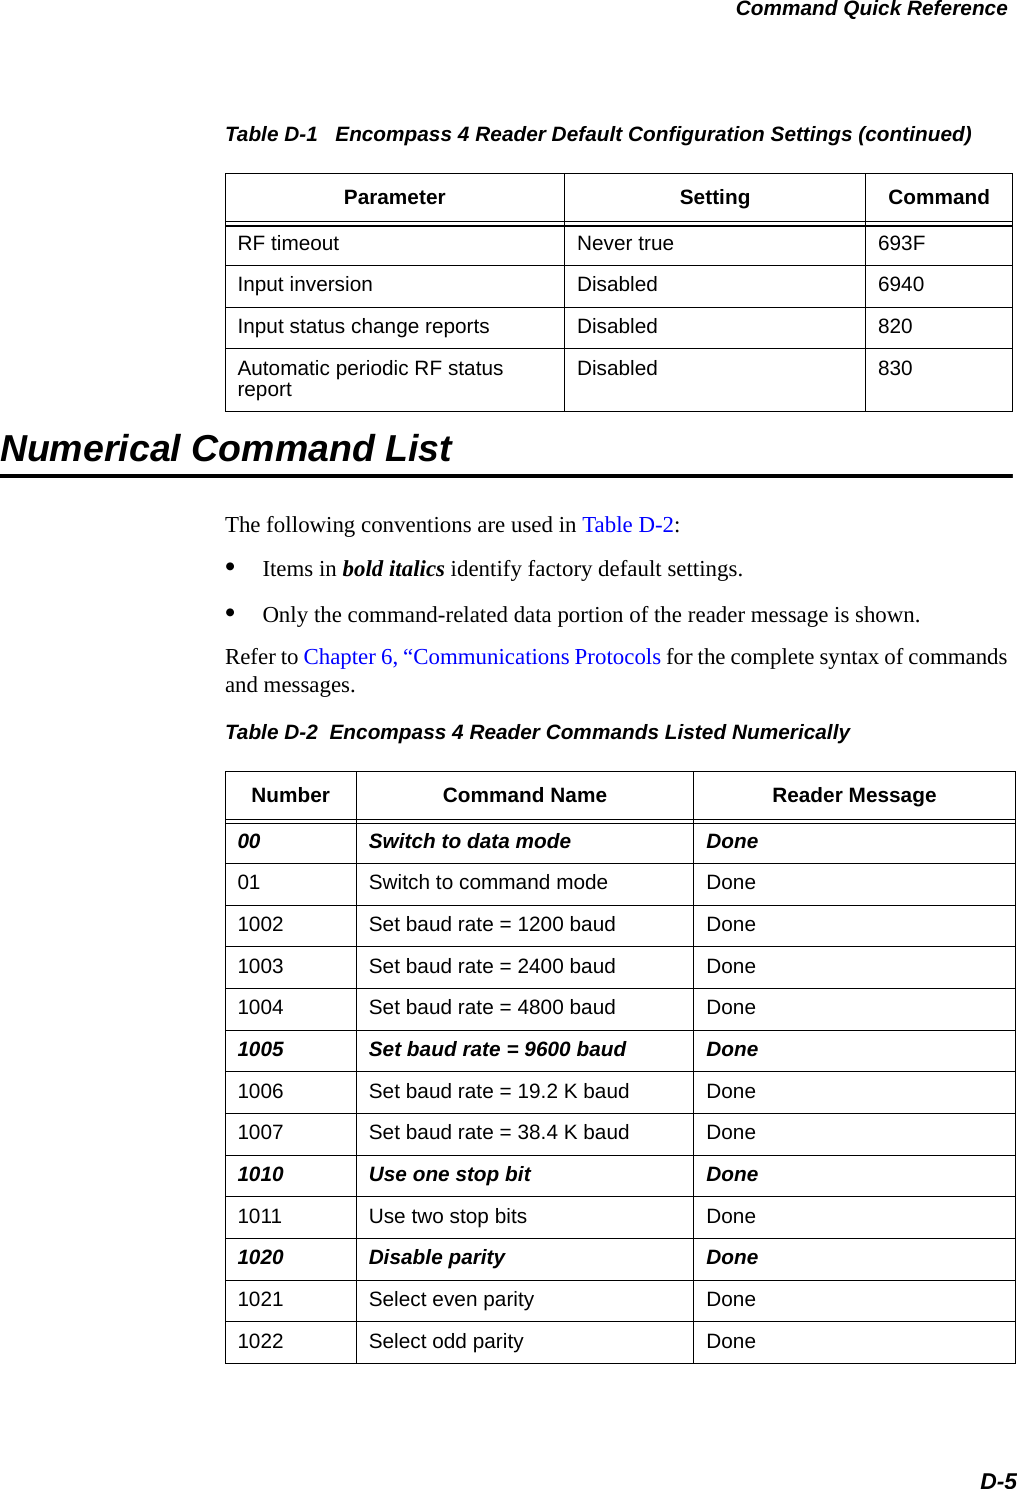 Command Quick ReferenceD-5Numerical Command ListThe following conventions are used in Table D-2: •Items in bold italics identify factory default settings.•Only the command-related data portion of the reader message is shown.Refer to Chapter 6, “Communications Protocols for the complete syntax of commands and messages. RF timeout Never true 693FInput inversion Disabled 6940Input status change reports Disabled 820Automatic periodic RF status report Disabled 830Table D-1   Encompass 4 Reader Default Configuration Settings (continued)Parameter Setting CommandTable D-2  Encompass 4 Reader Commands Listed Numerically Number Command Name Reader Message00 Switch to data mode Done01 Switch to command mode Done1002 Set baud rate = 1200 baud Done1003 Set baud rate = 2400 baud Done1004 Set baud rate = 4800 baud Done1005 Set baud rate = 9600 baud Done1006 Set baud rate = 19.2 K baud Done1007 Set baud rate = 38.4 K baud Done1010 Use one stop bit Done1011 Use two stop bits Done1020 Disable parity Done1021 Select even parity Done1022 Select odd parity Done